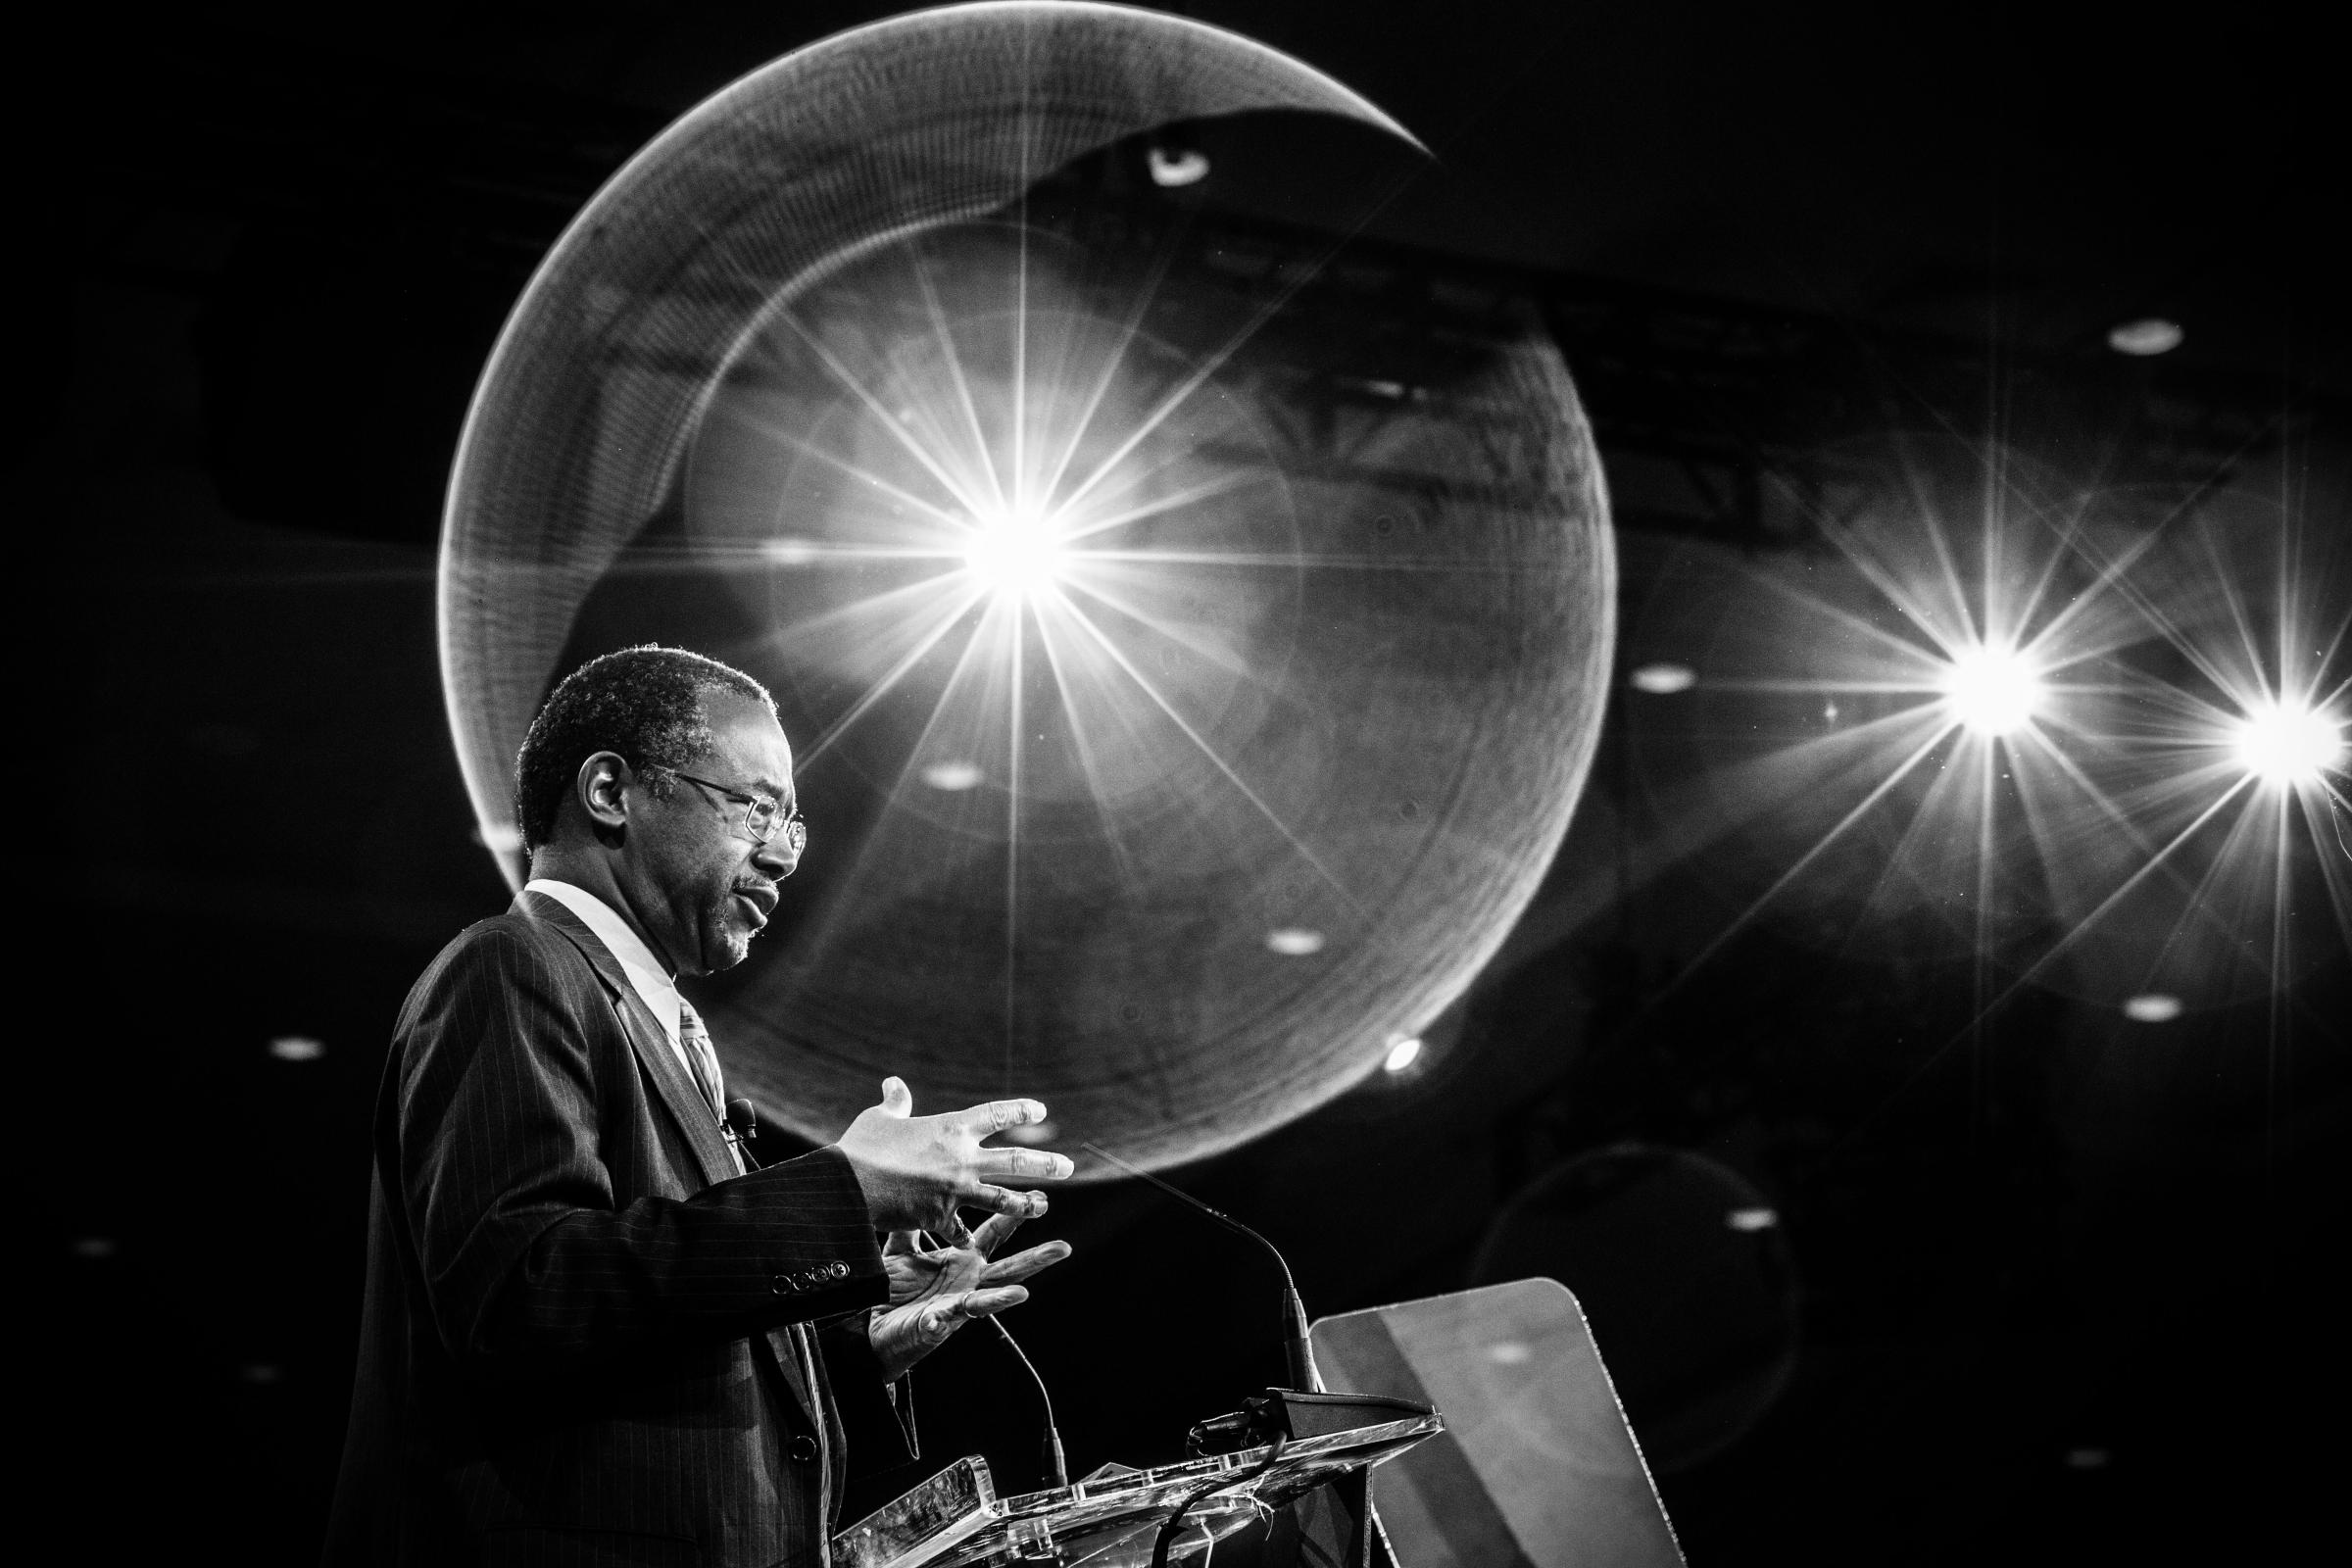 Retired neurosurgeon and Republican presidential candidate Ben Carson spoke at the Conservative Political Action Conference in National Harbor, Maryland in 2015.